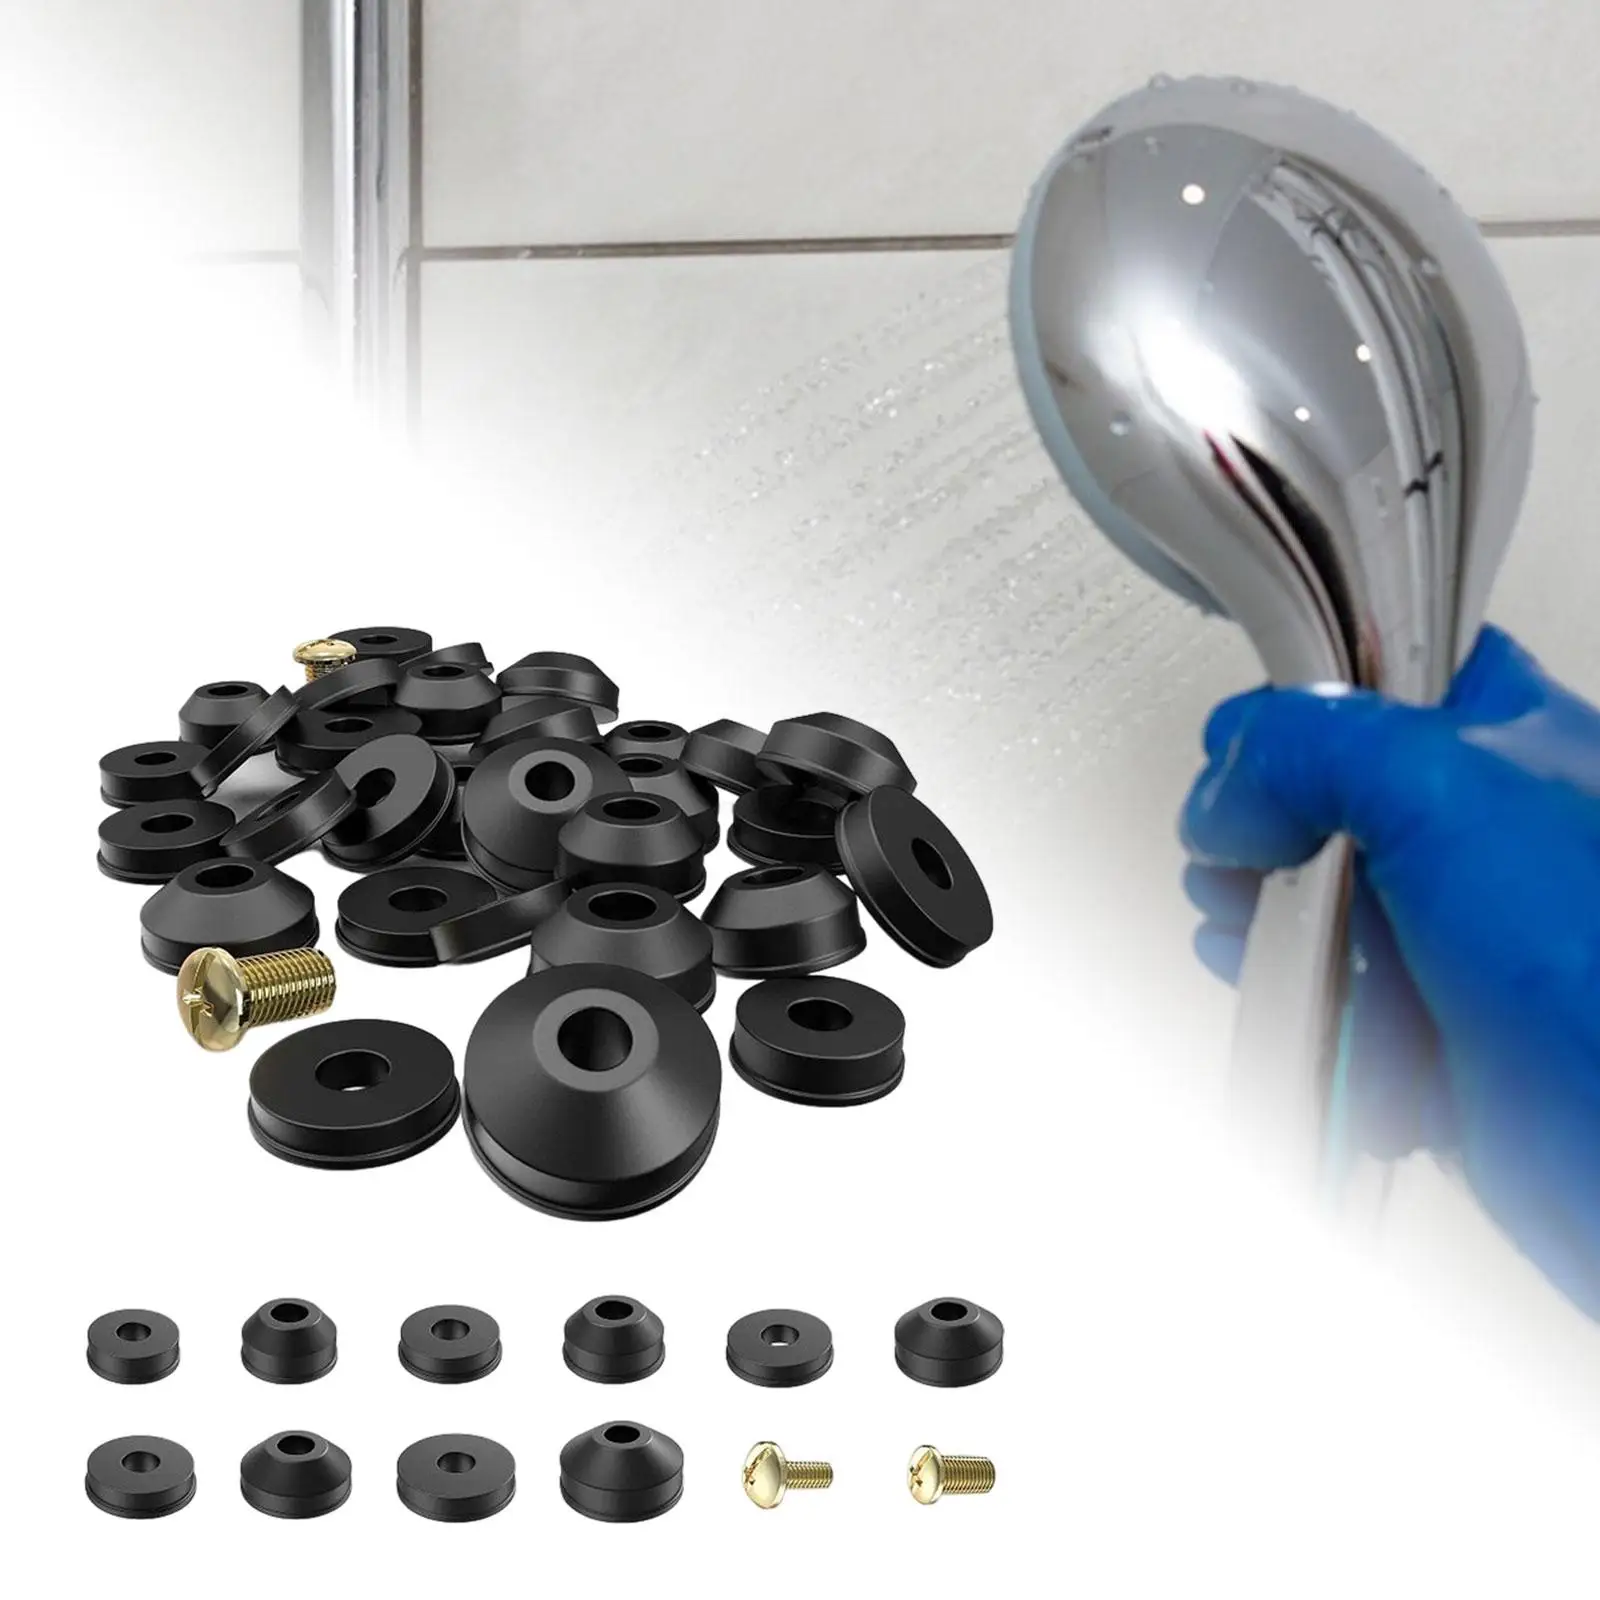 58 Pieces Rubber Faucet Washer Gasket Part with Screws Accessories Assortment Flat and Bevelled for Maintenance Plumbing Repair